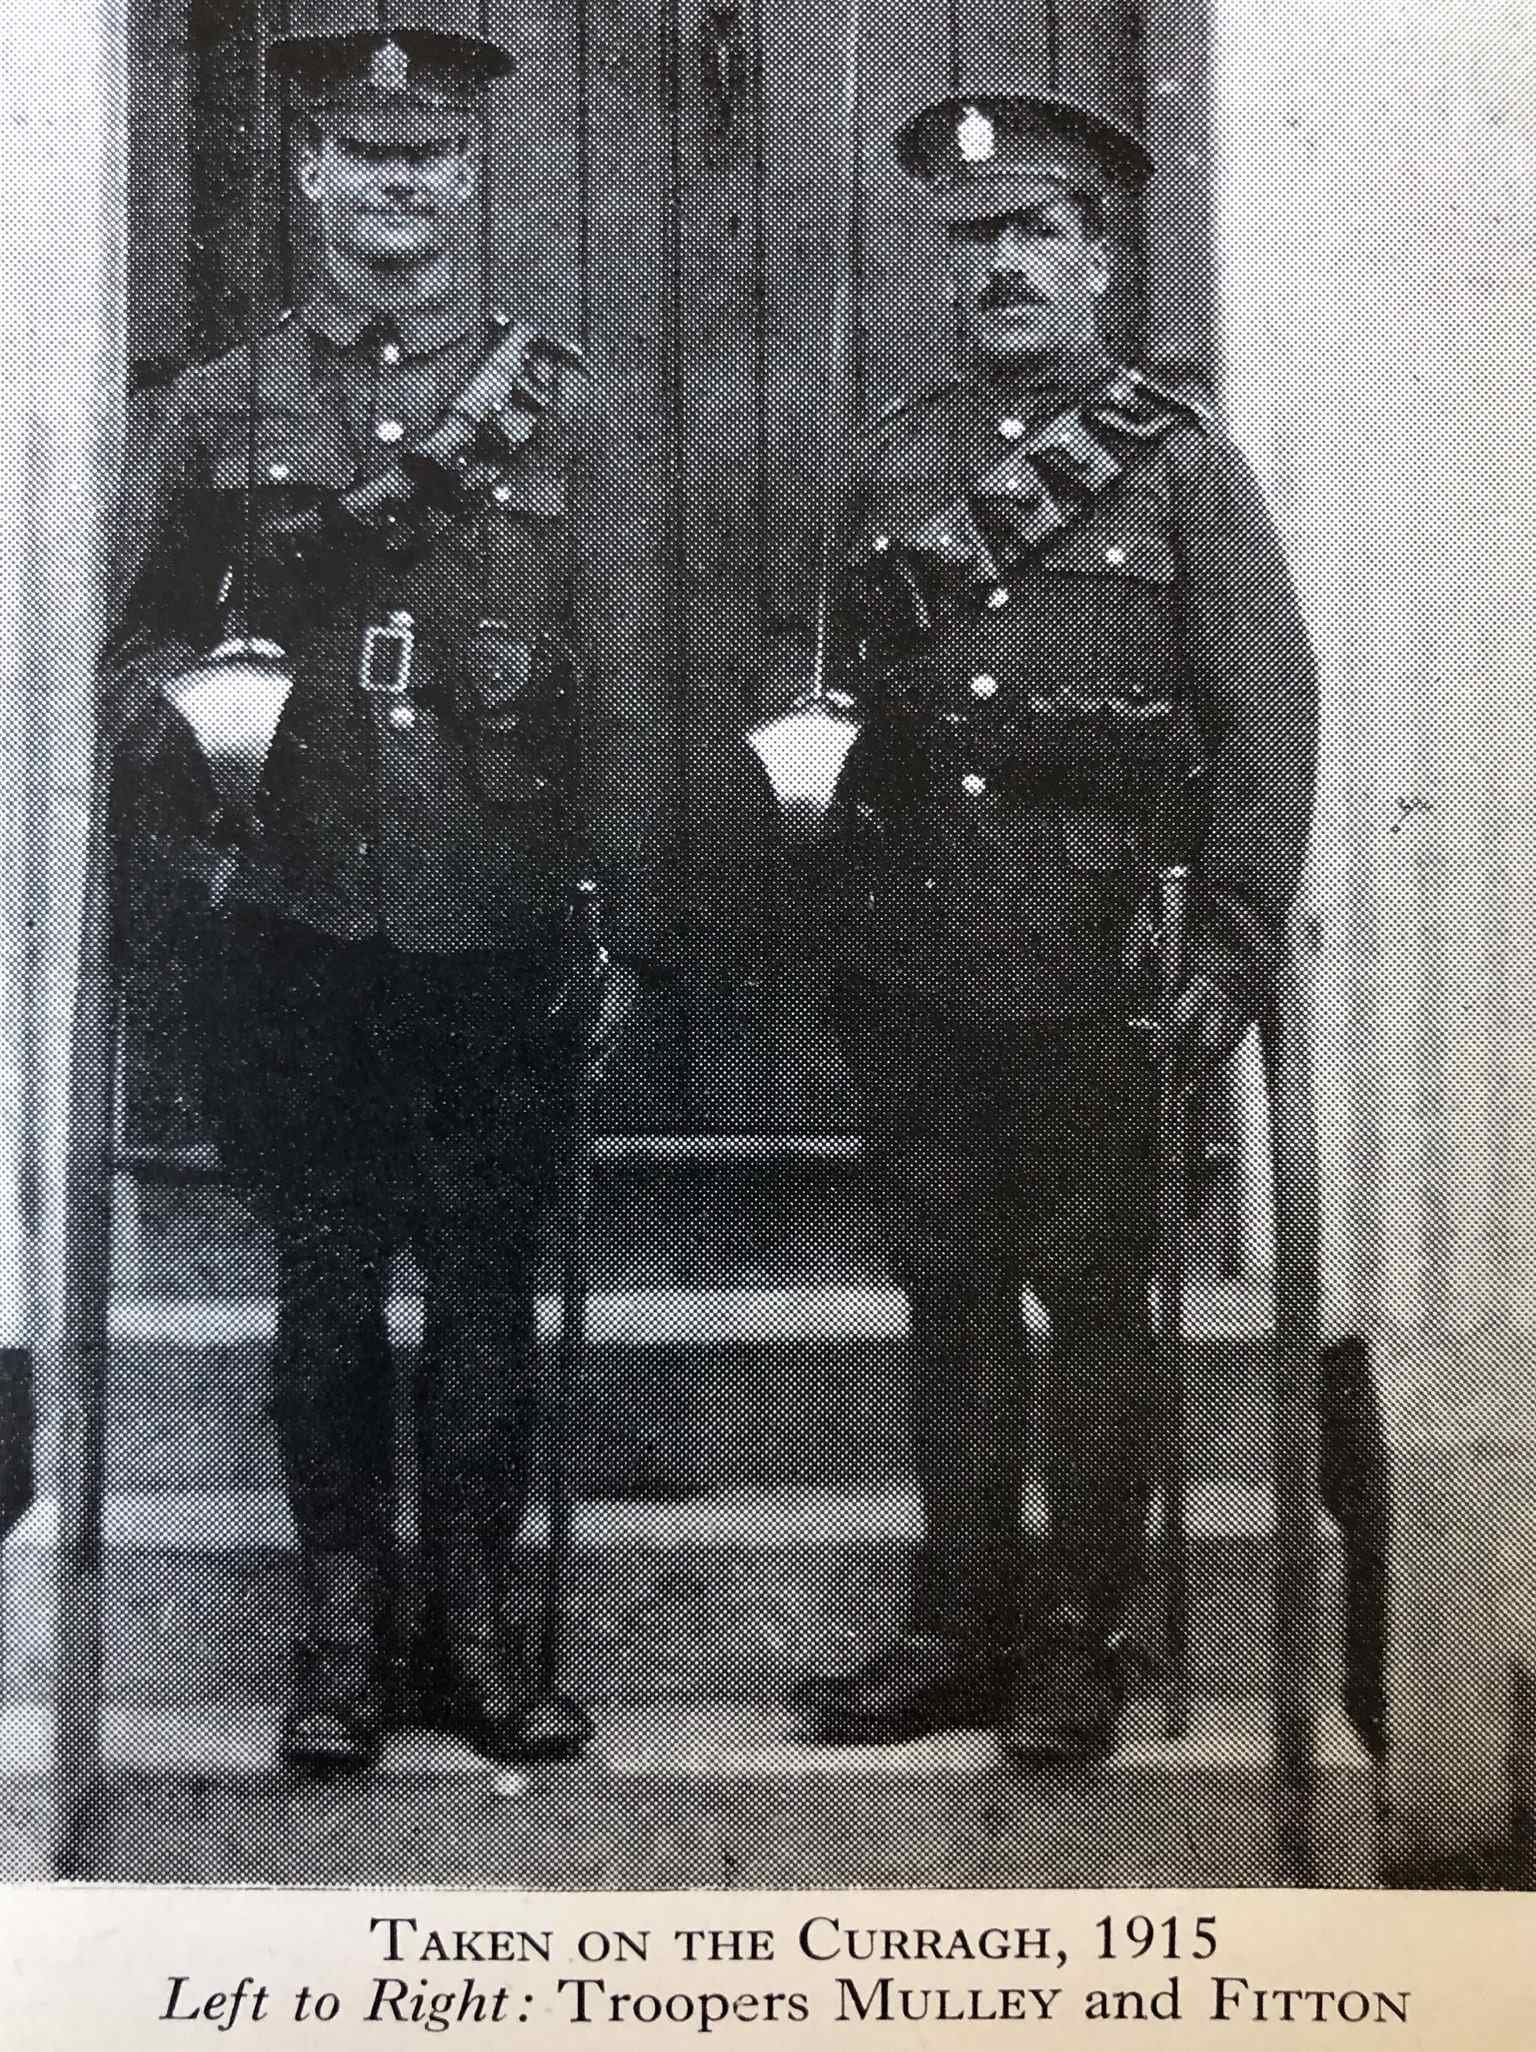 MULLEY, Reginald. 1215. Corporal, Corporal Royal Fusiliers GS/59470. (On the left)